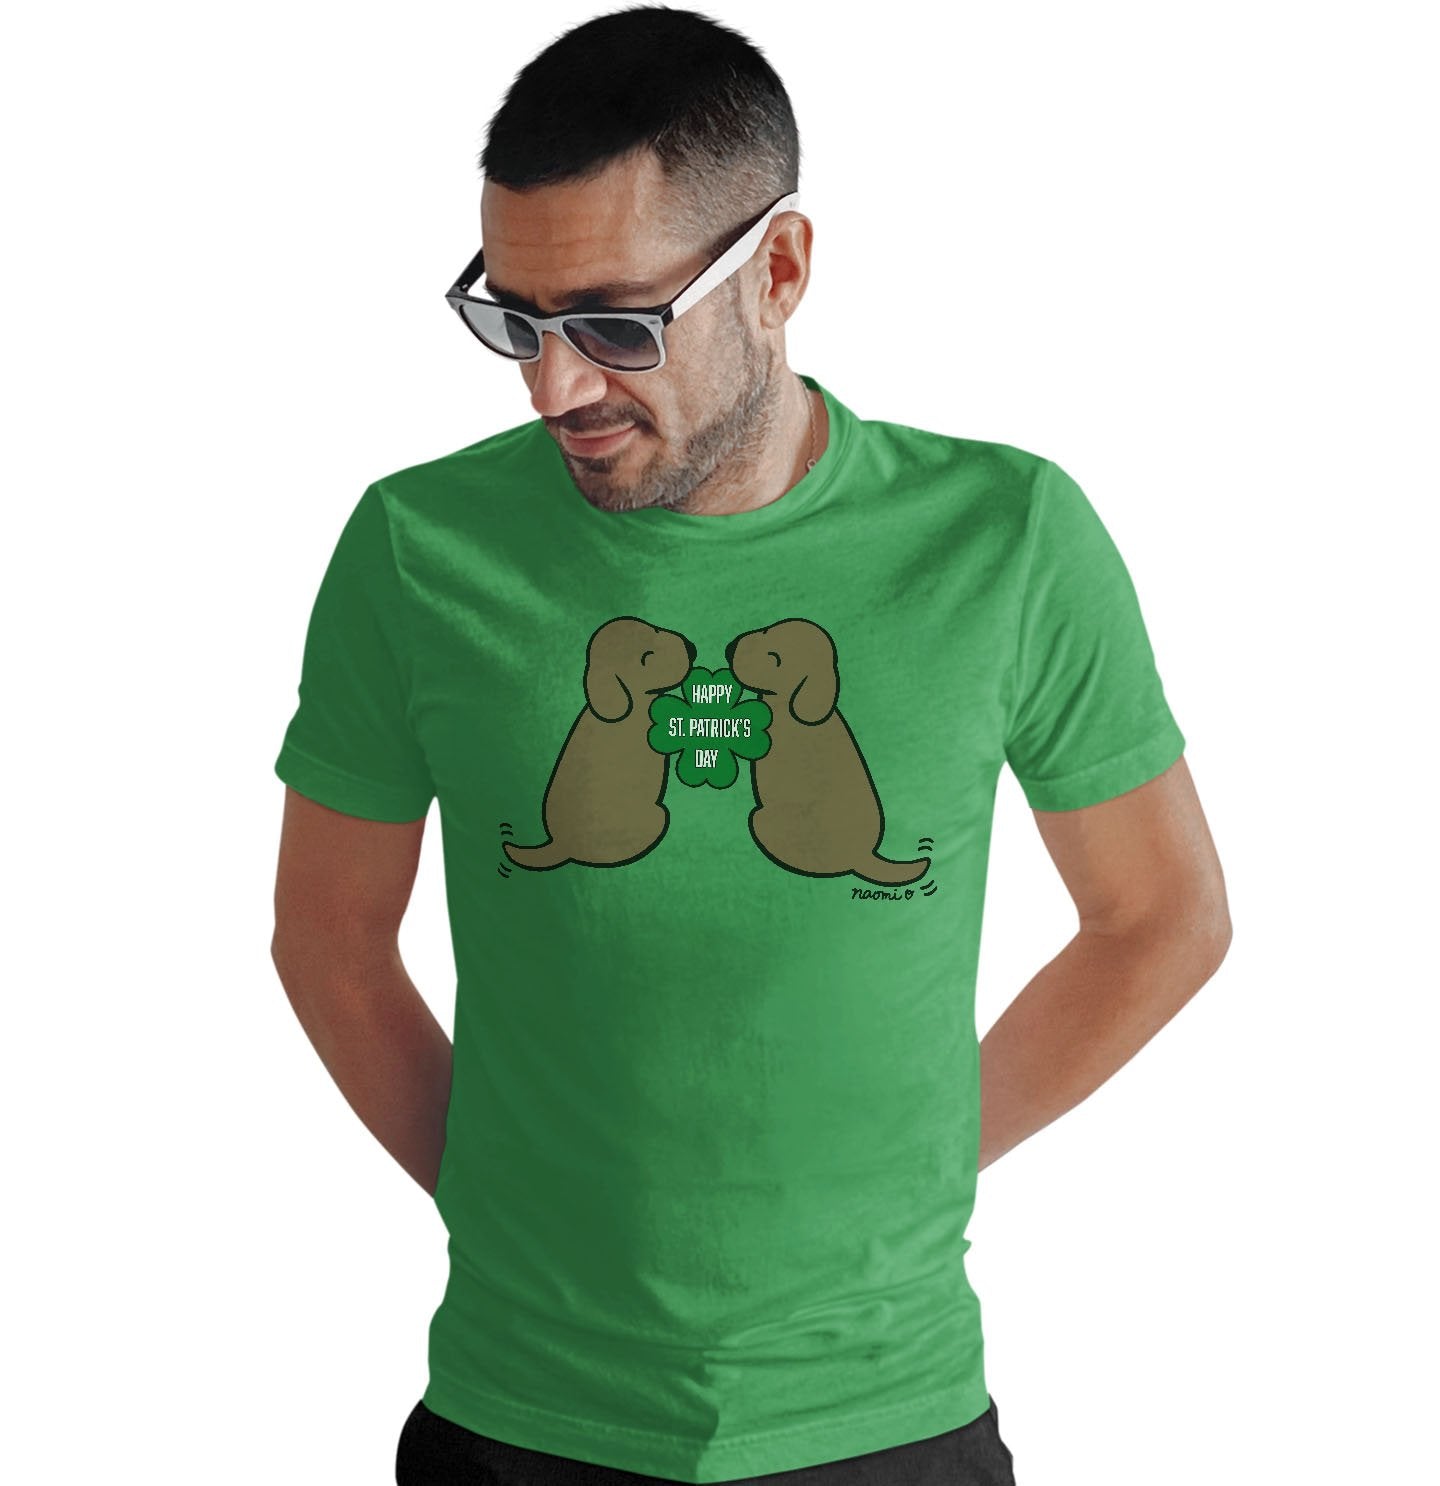 Happy St. Patrick's Day Chocolate Lab Puppies - Adult Unisex T-Shirt